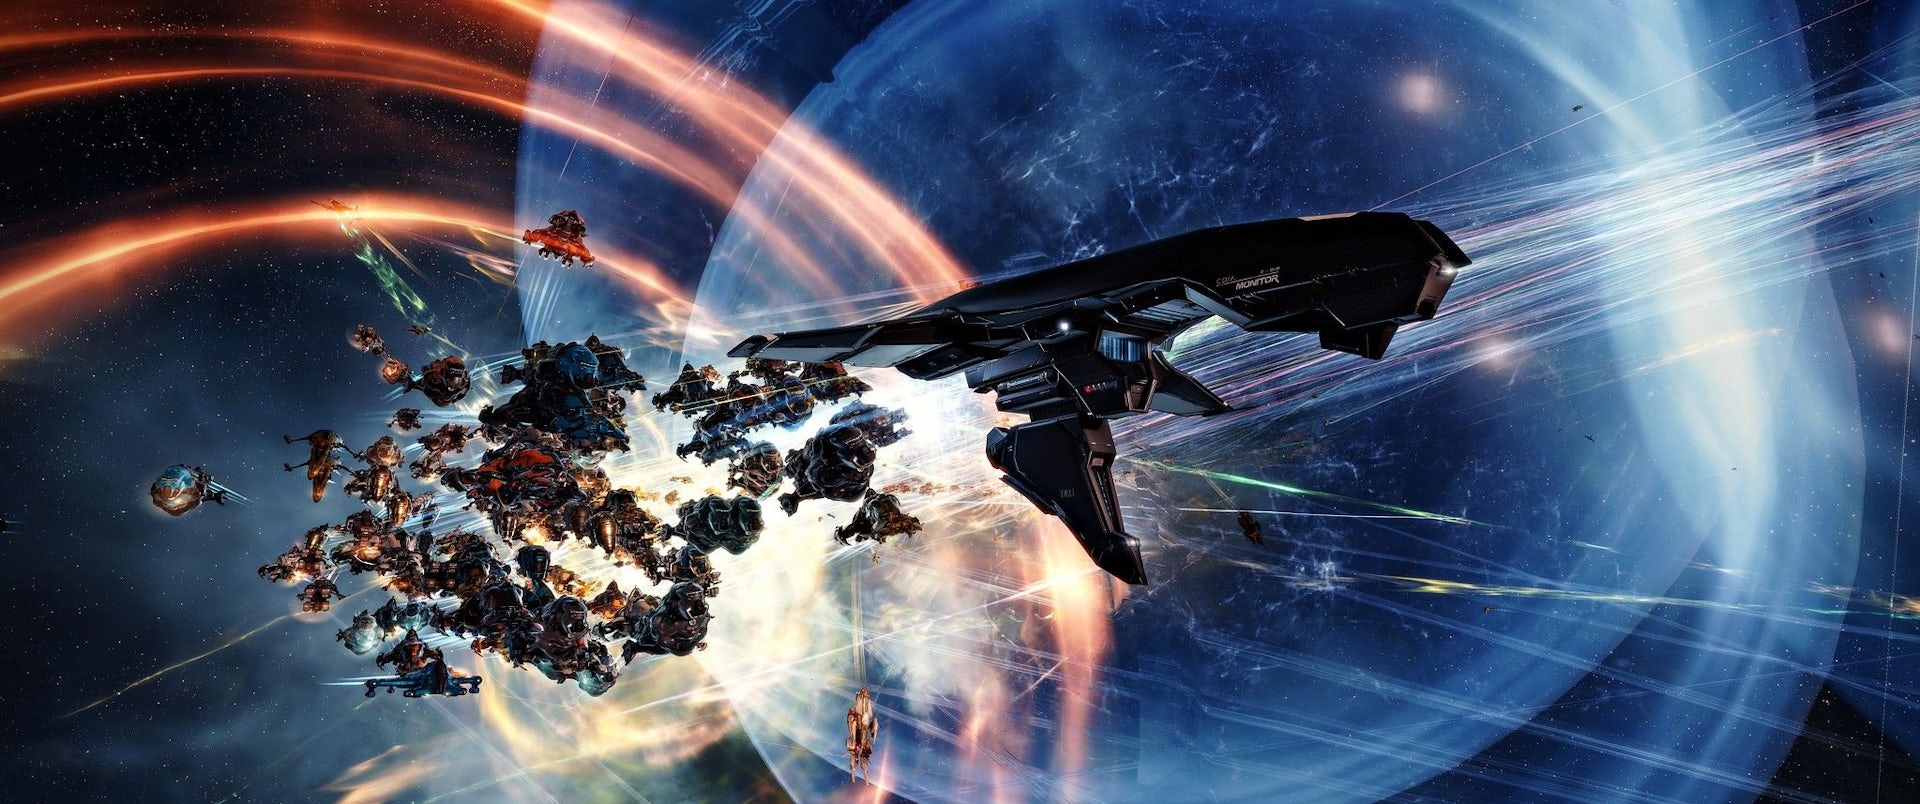 Your narrowest escapes in EVE Online